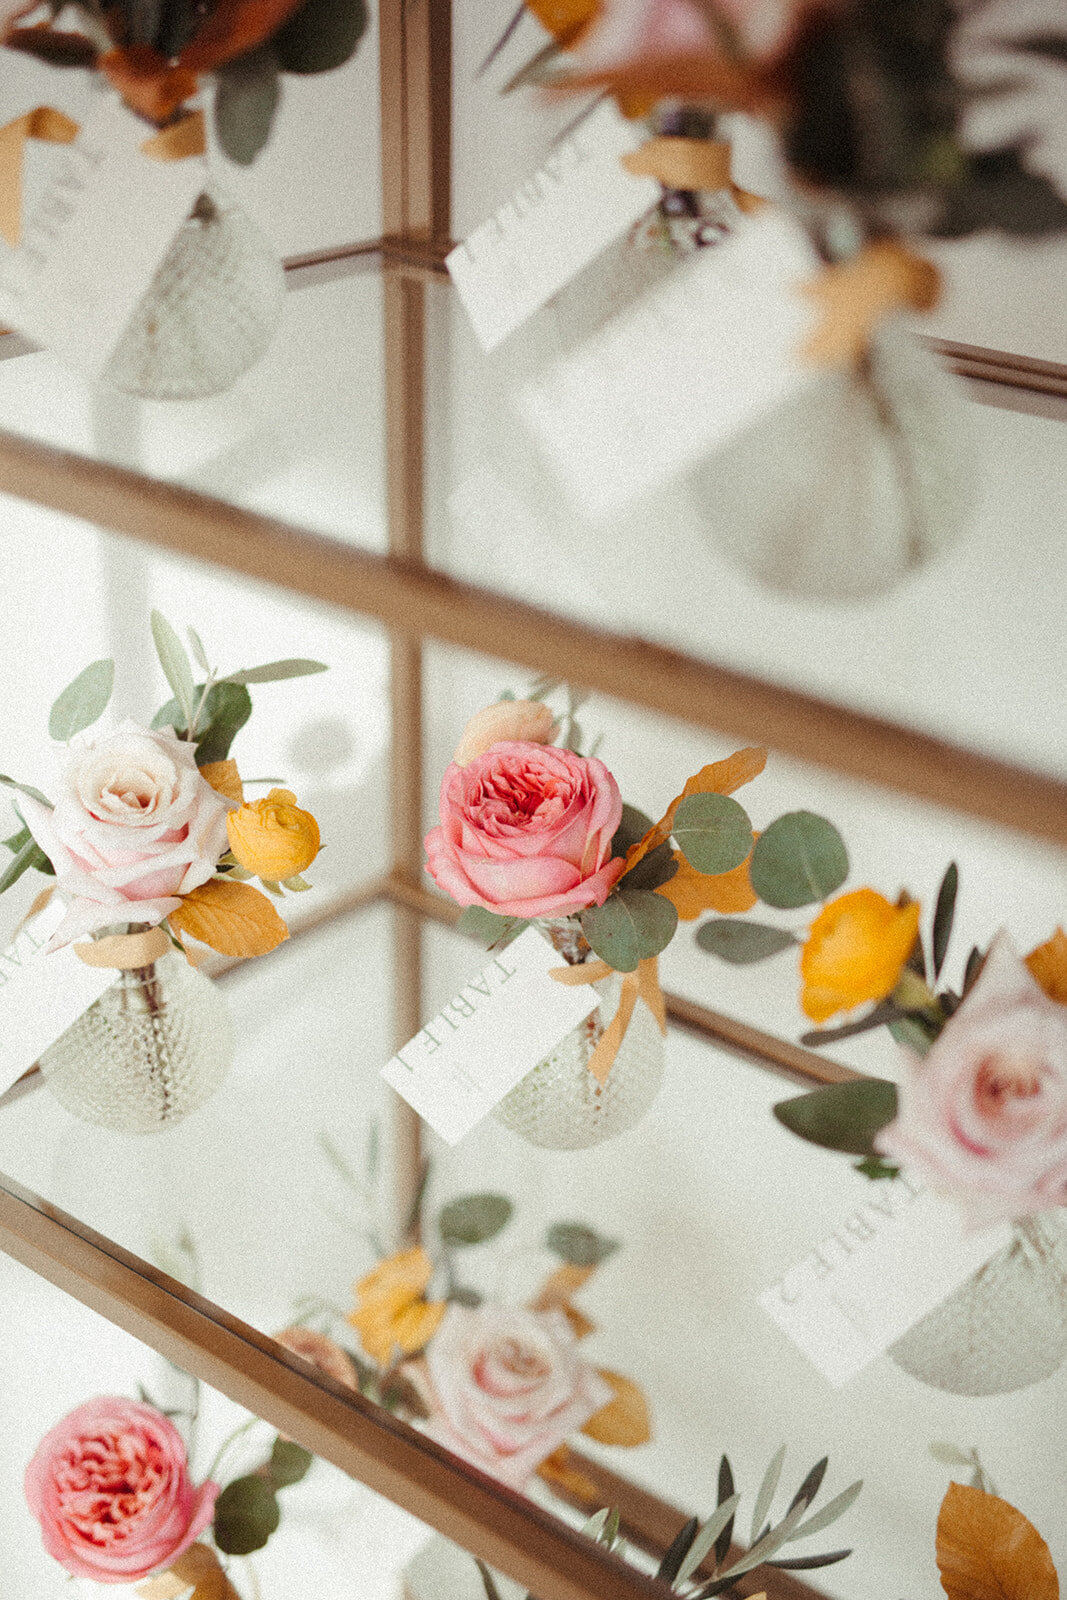 White place cards with light gray font tied to glass vases filled with flowers.